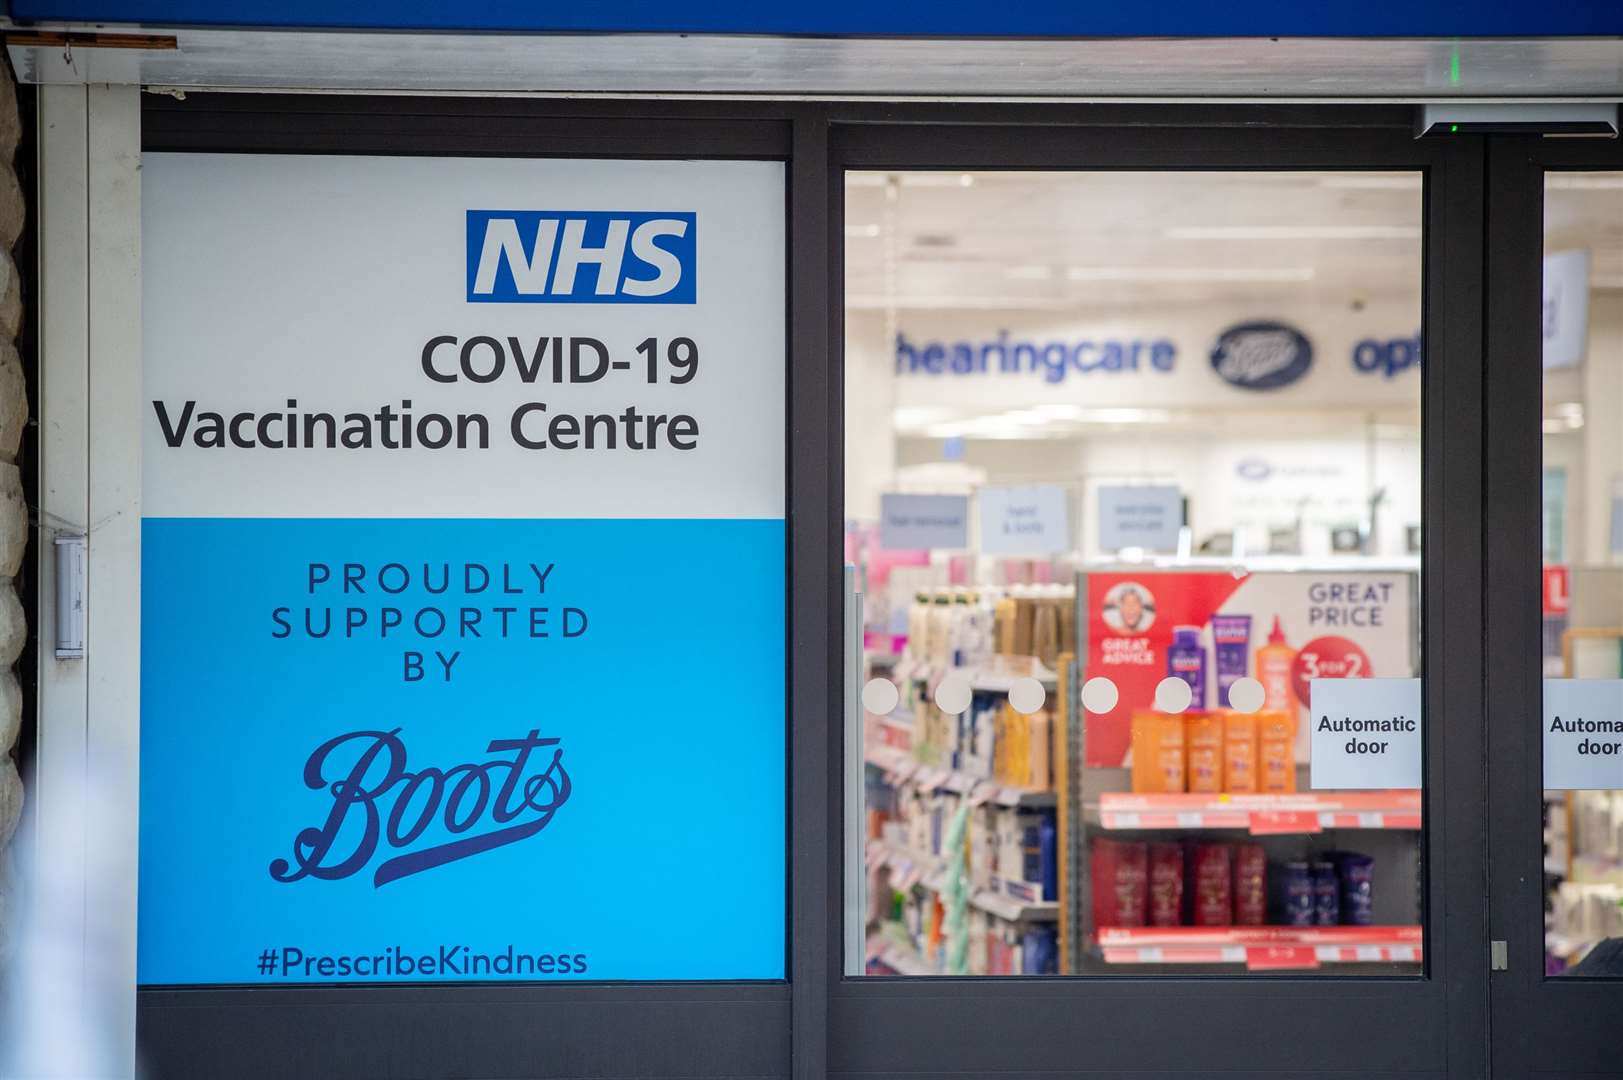 boots travel vaccination